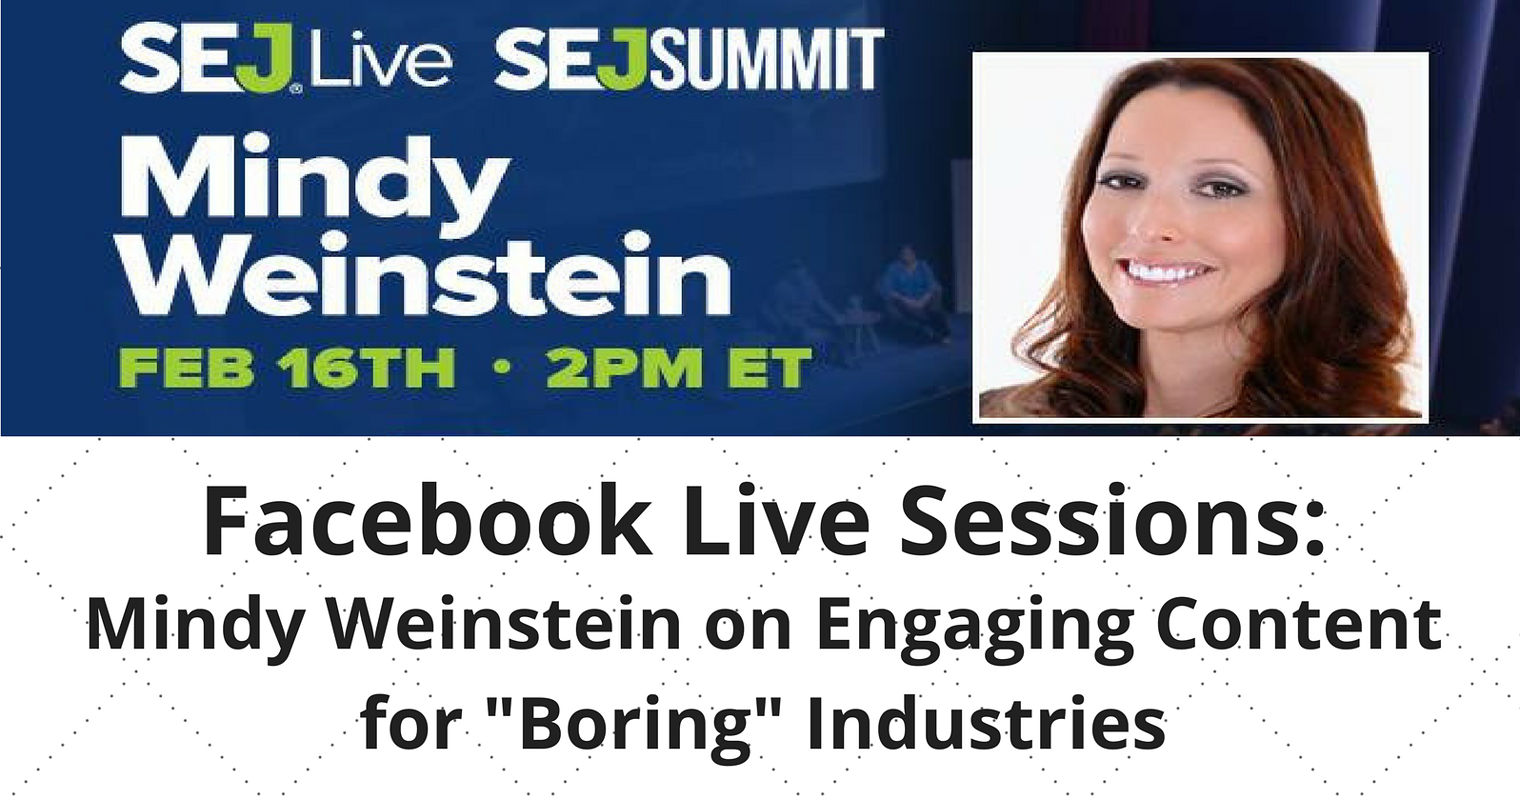 SEJ Live: Mindy Weinstein on Engaging Content for “Boring” Industries